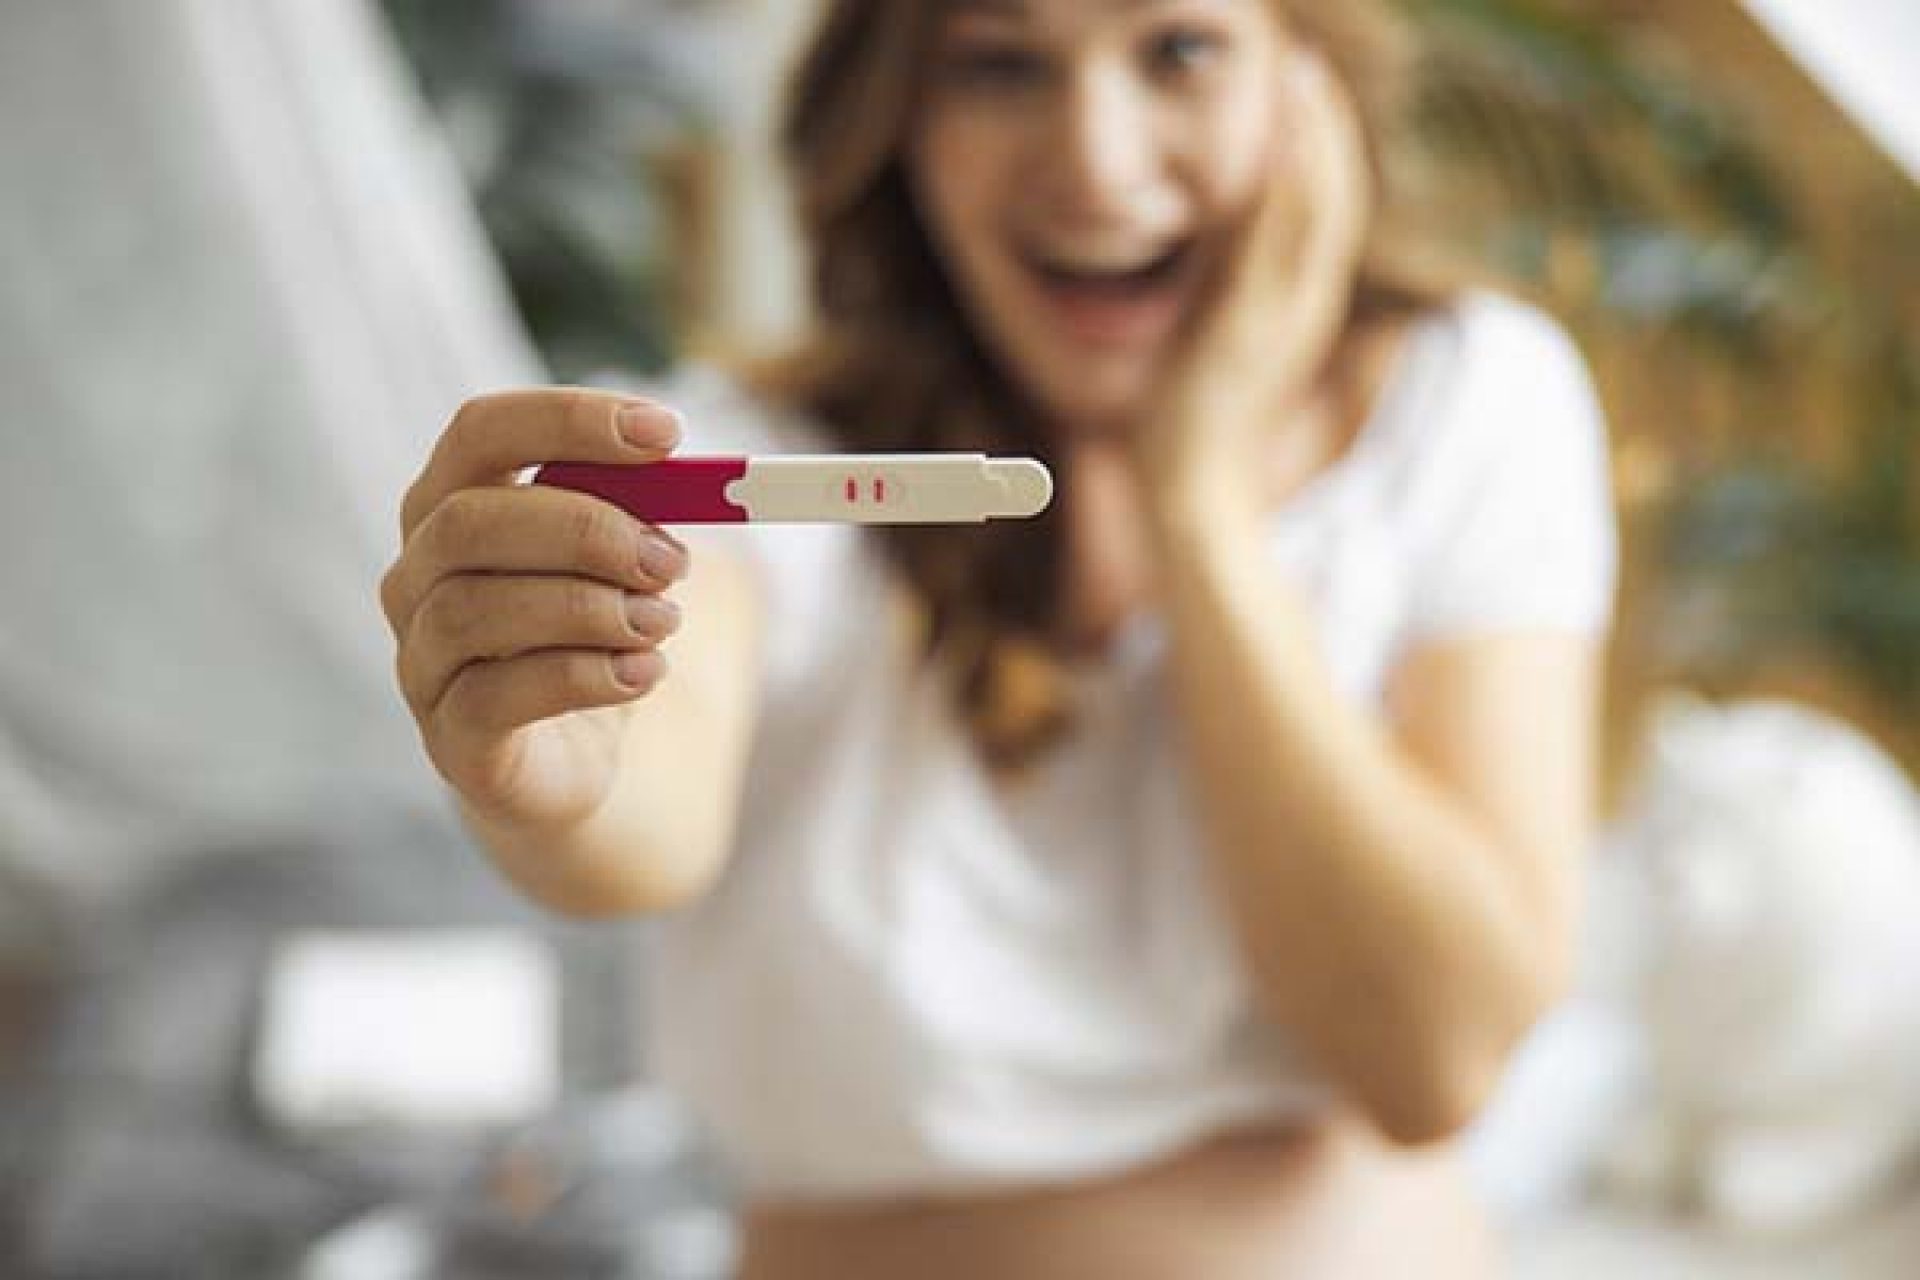 3 tips to prepare for IVF success